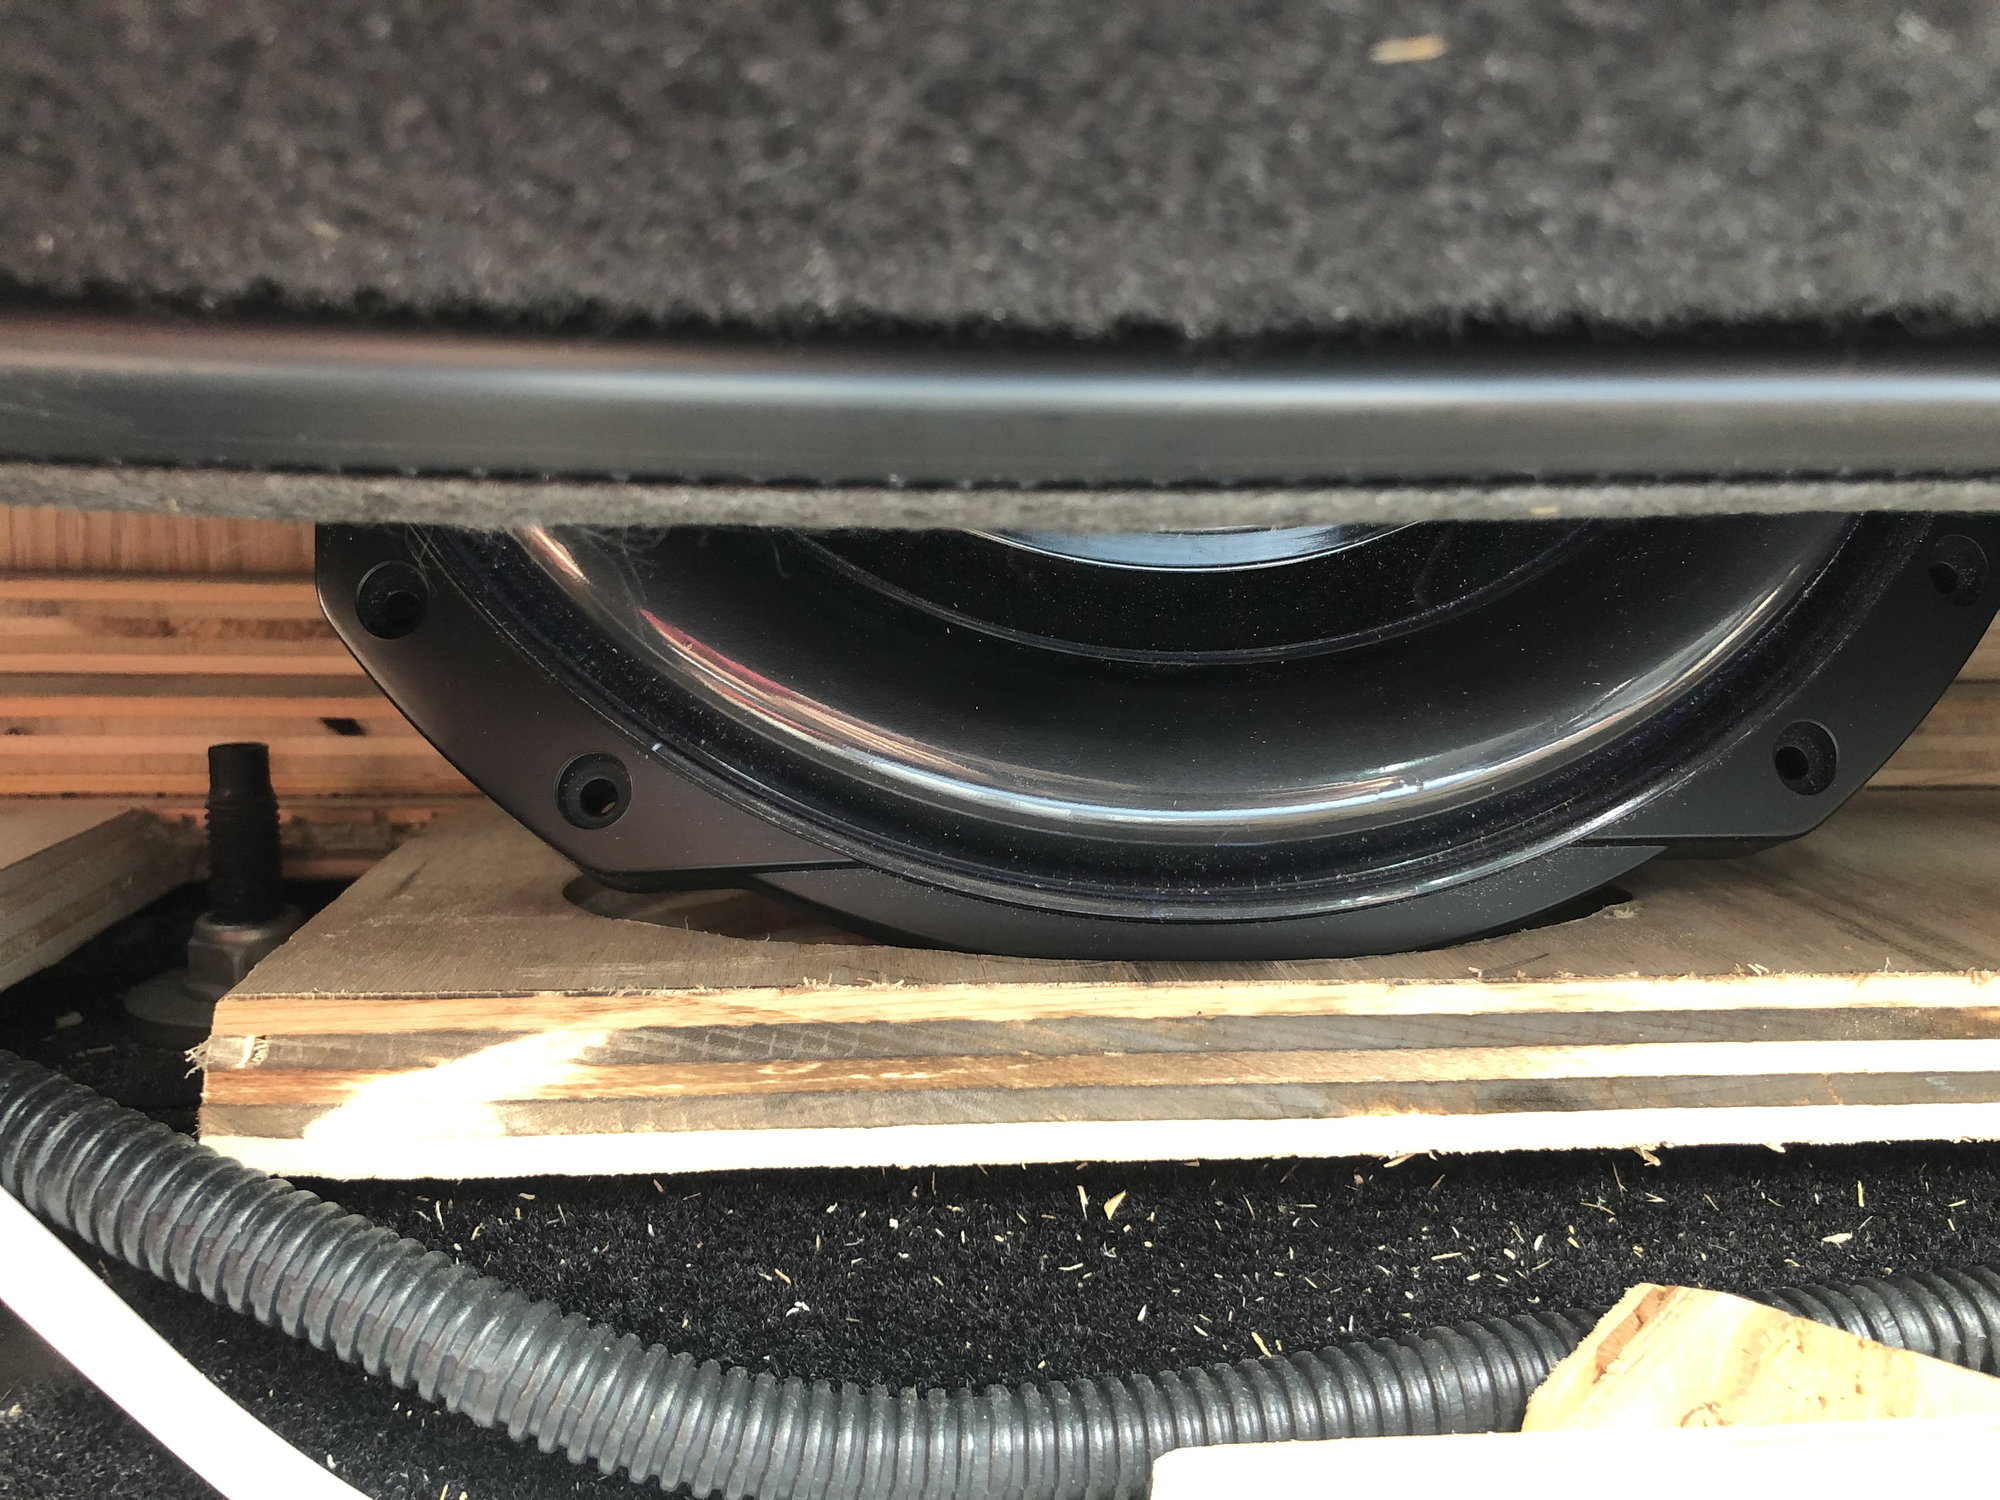 Subwoofer box dimensions for behind the seat 15-21 crew cab - Ford F150  Forum - Community of Ford Truck Fans